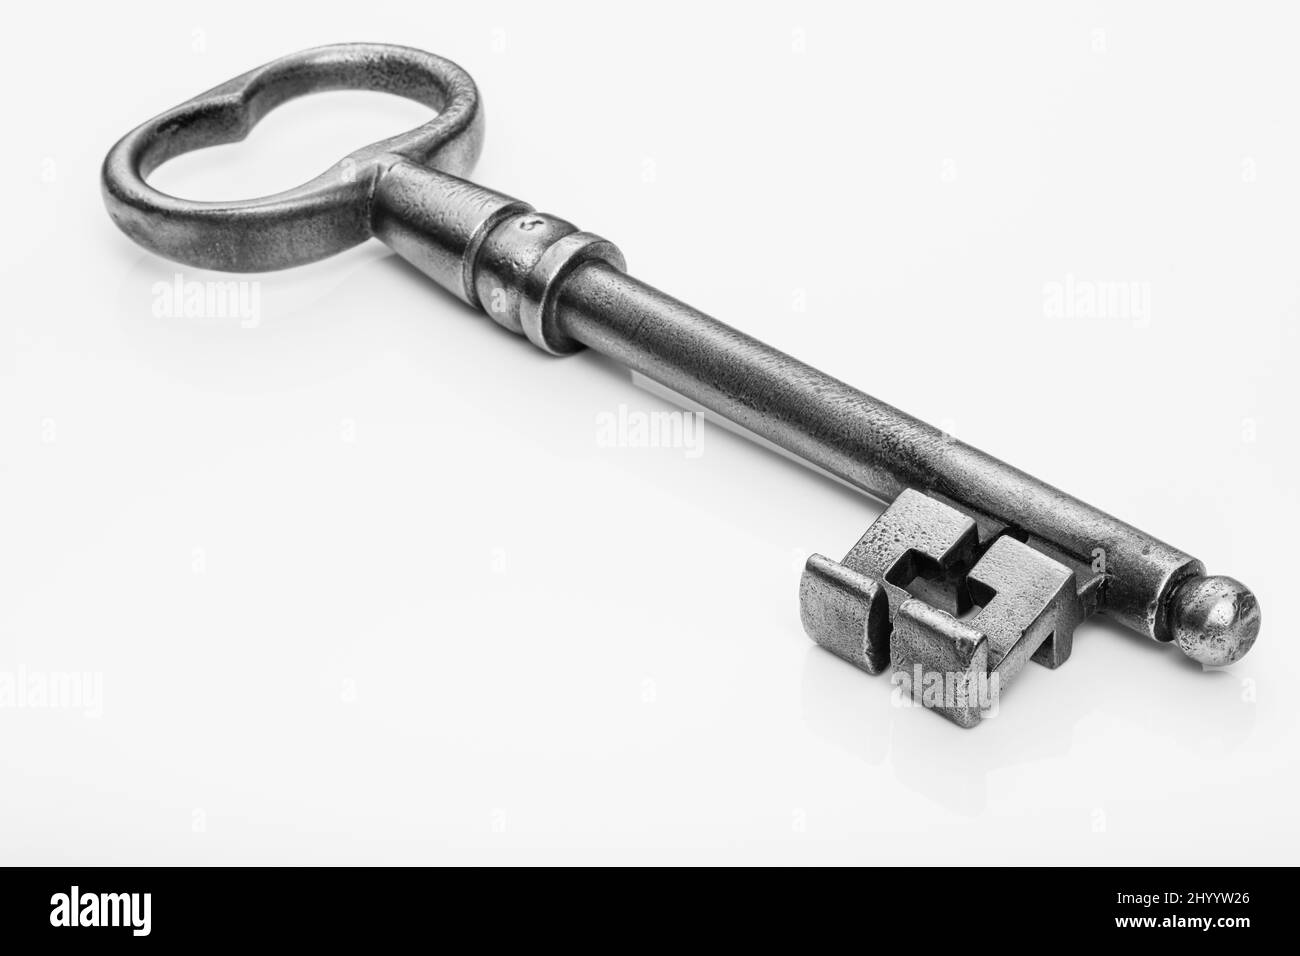 Antique forged key of a castle Stock Photo